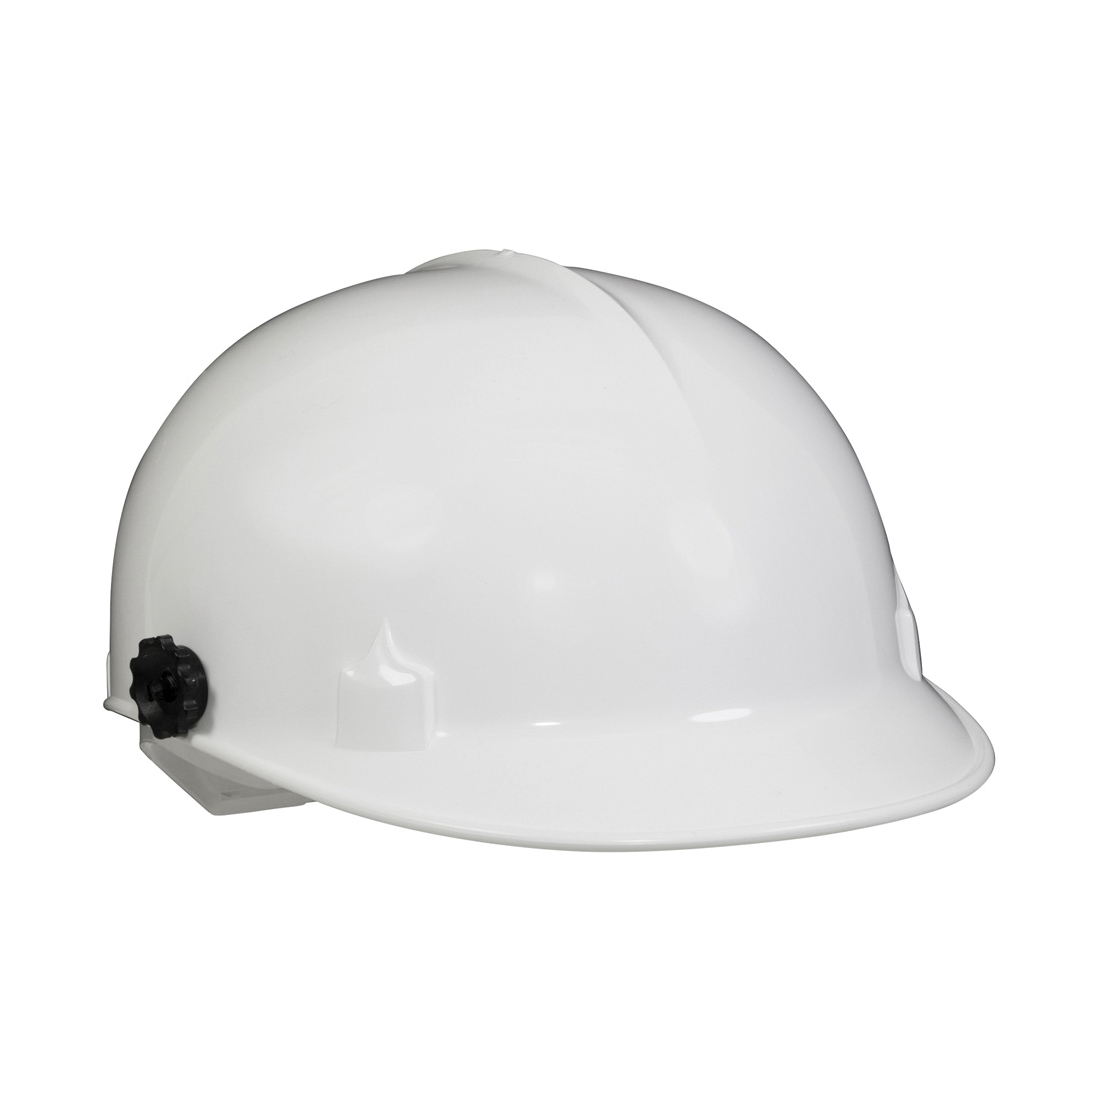 Jackson Safety* 20186 BC100 Lightweight Bump Cap With Faceshield Attachment, White, HDPE, 4-Point Pinlock Suspension redirect to product page